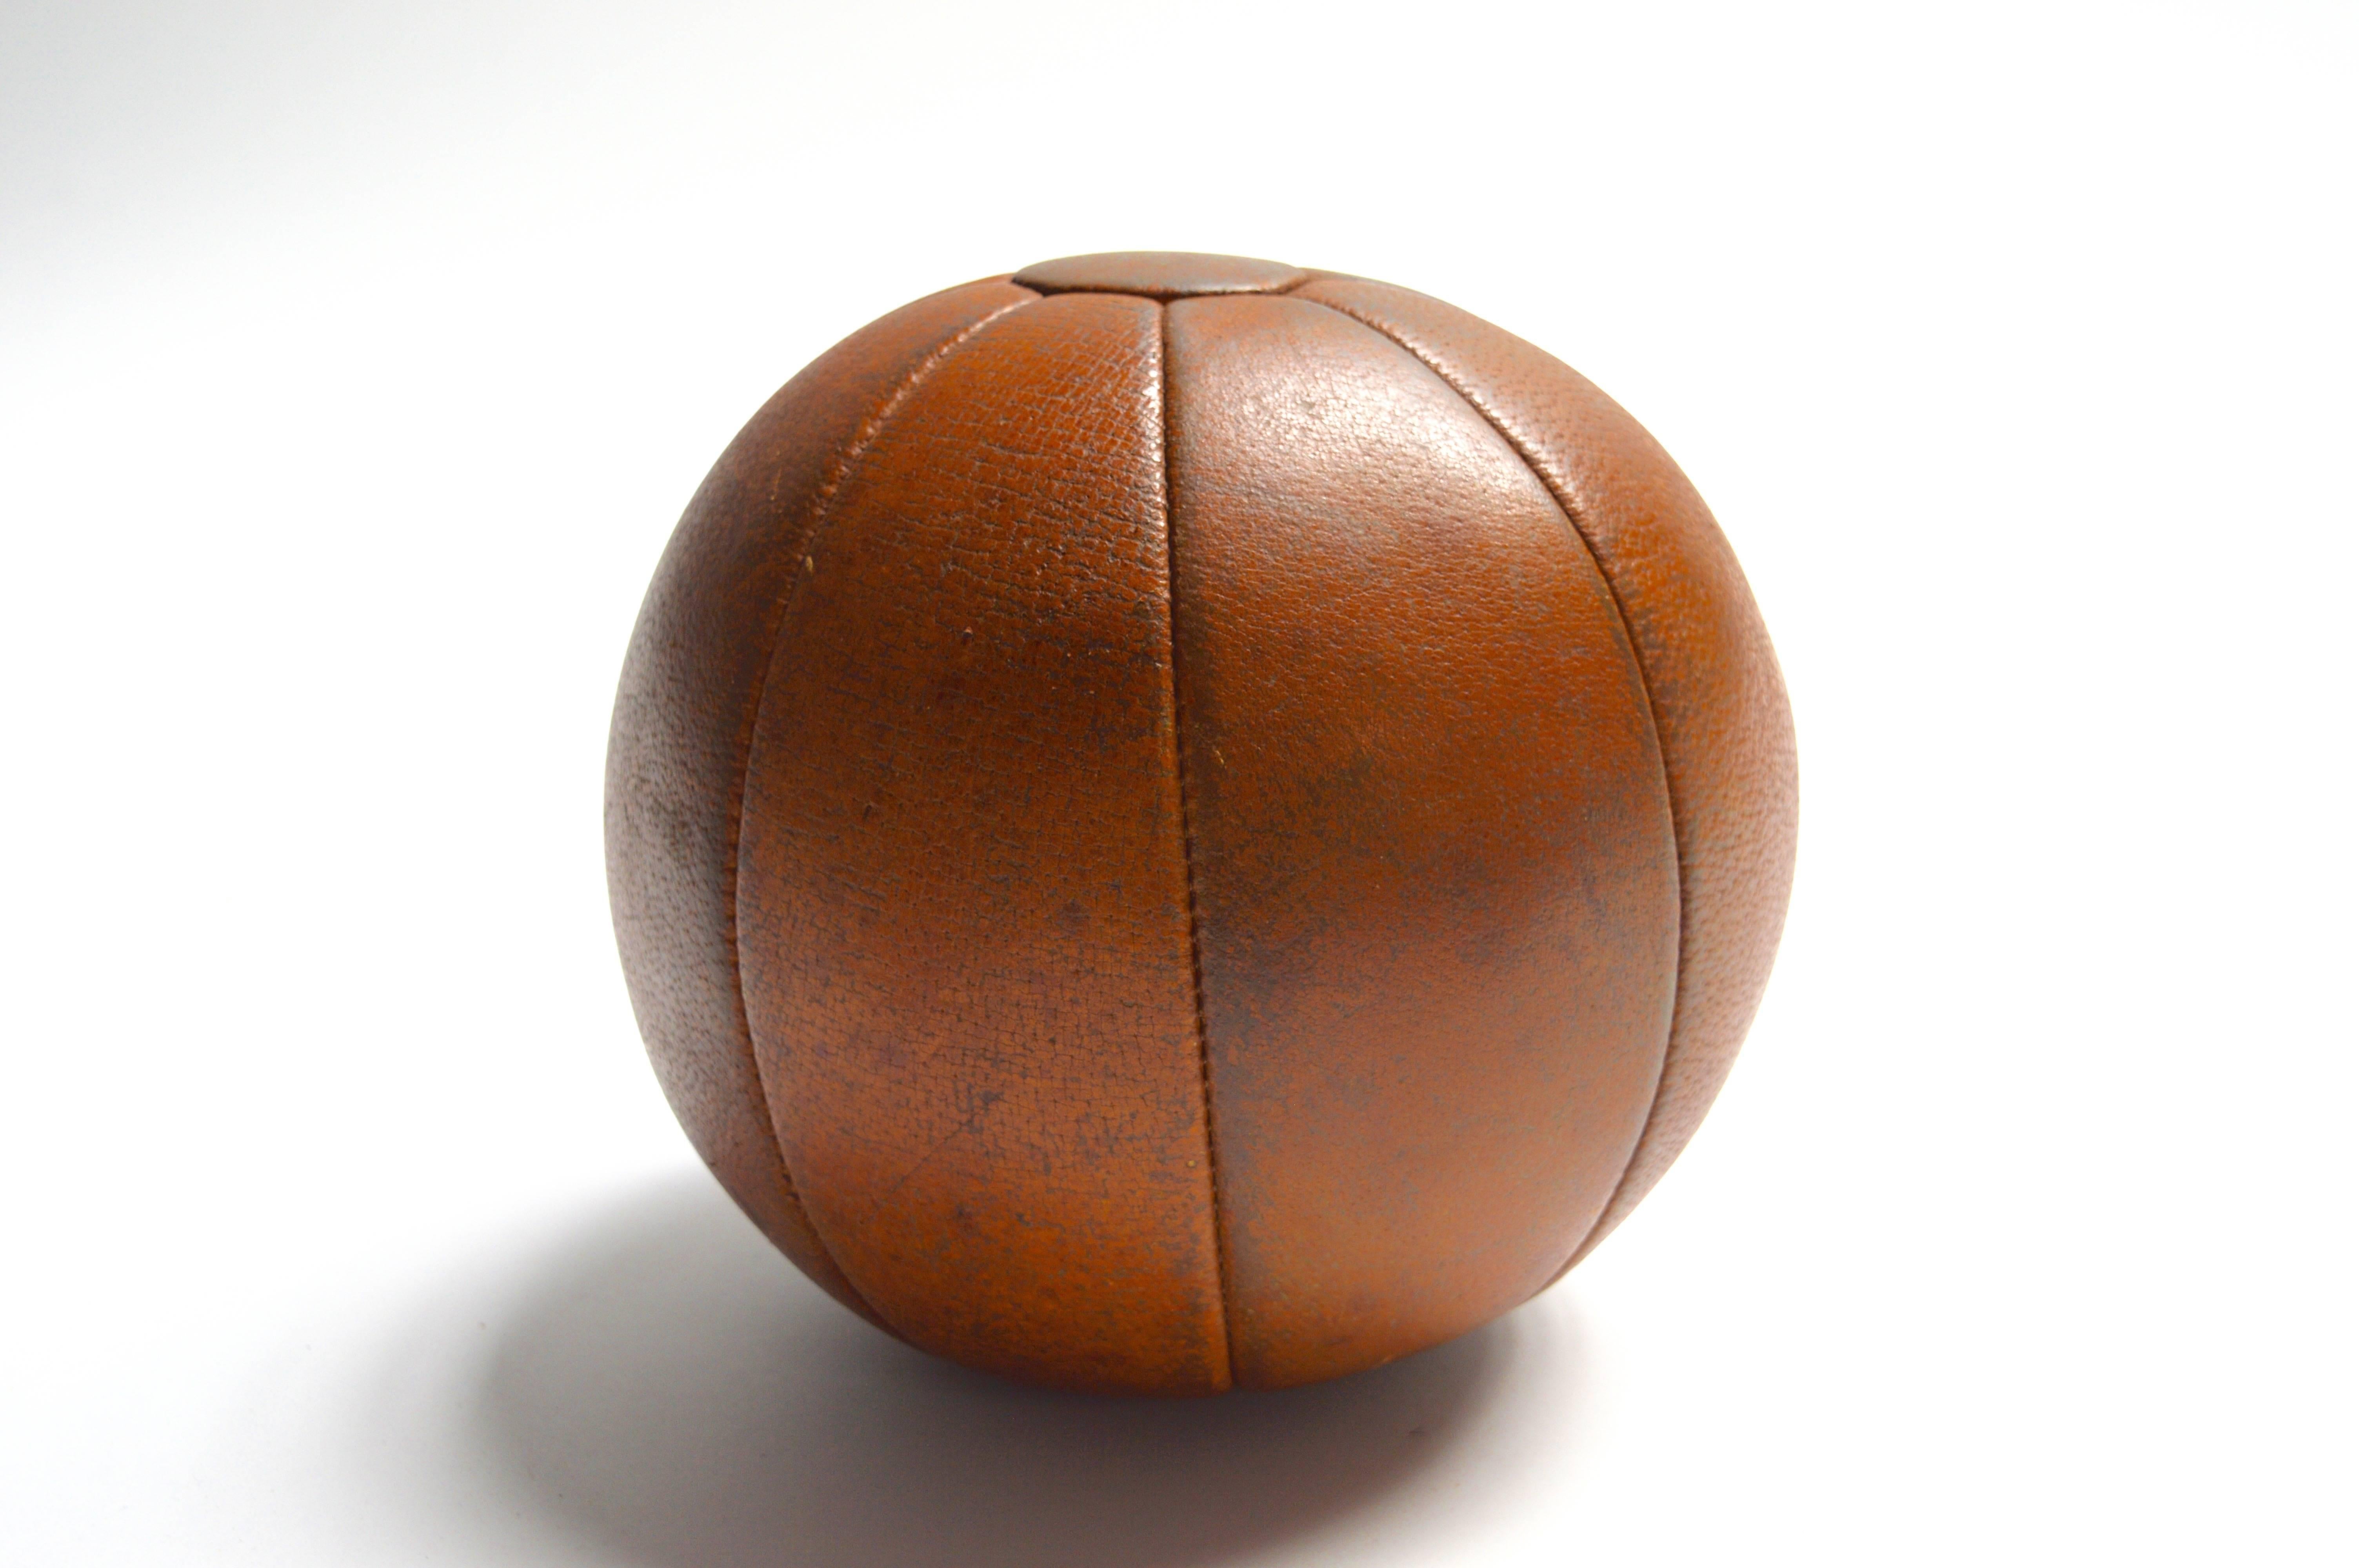 Handsome French medicine ball. Great patina to saddle leather. Excellent vintage condition. Great tabletop object. Perfect accessory for a home gym.